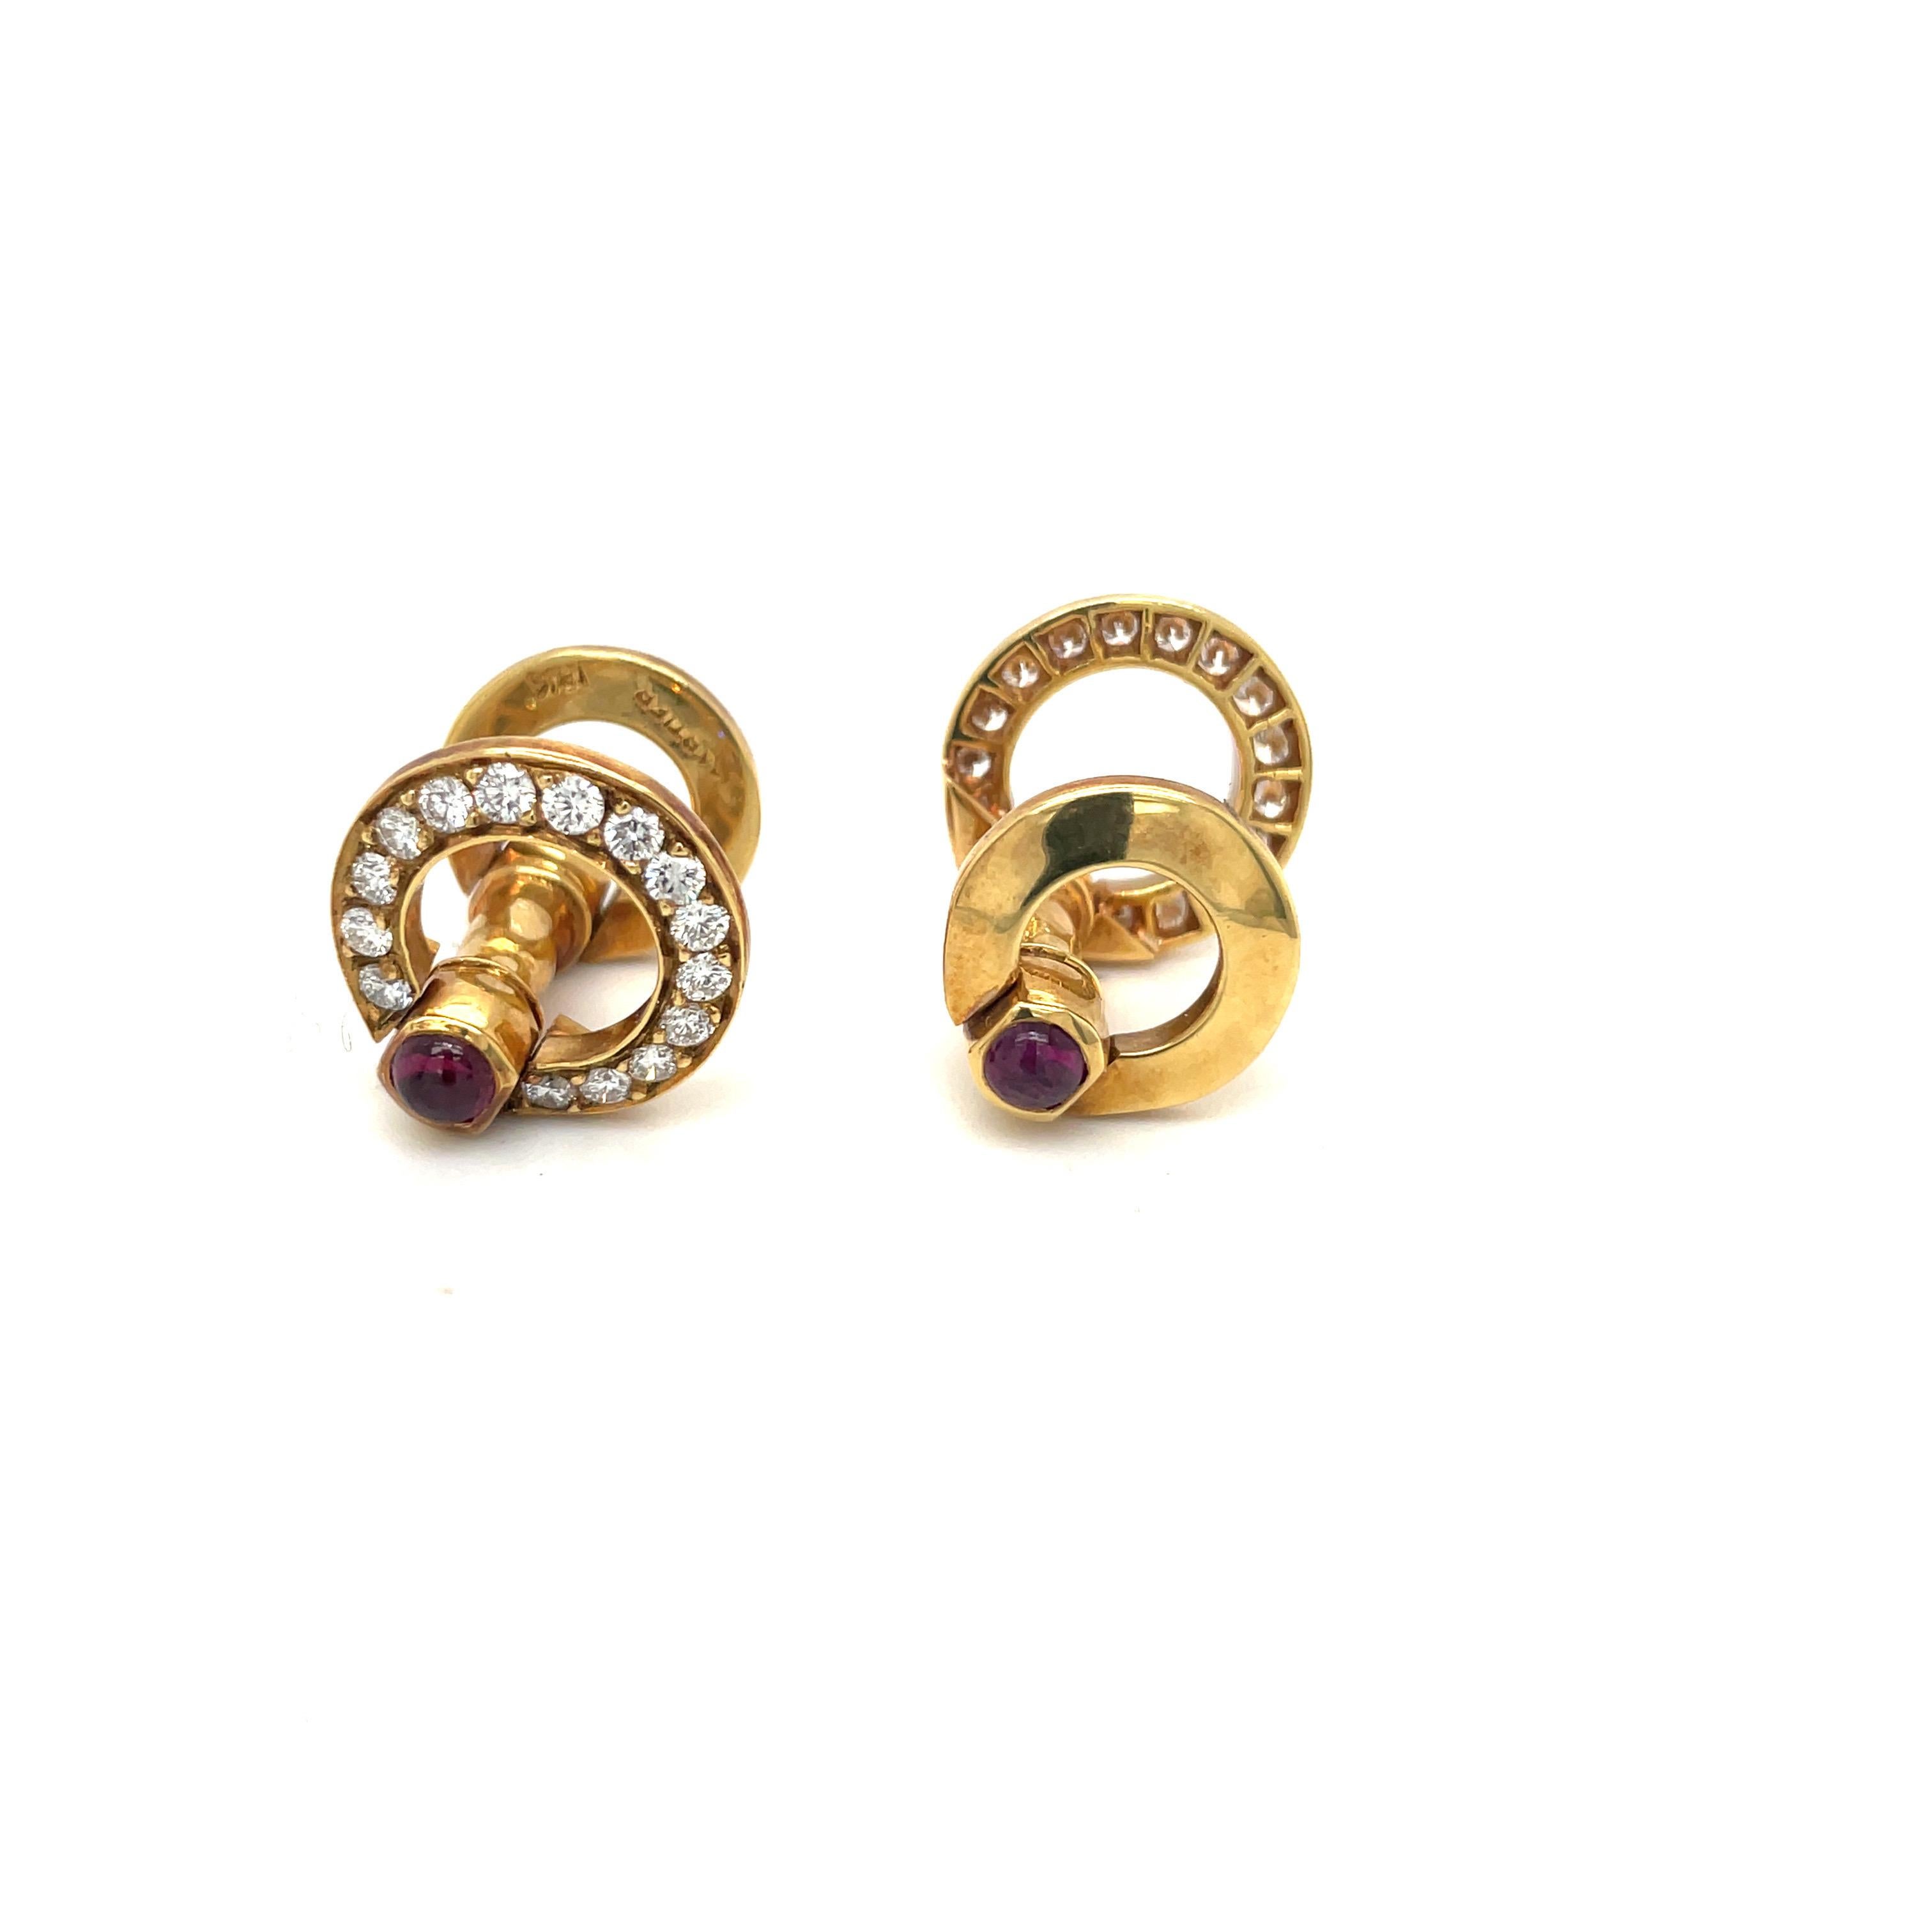 Contemporary Cartier 18 KT Yellow Gold Cuff Links with .94CT Diamonds 1.25 Ct Ruby Cabochon For Sale